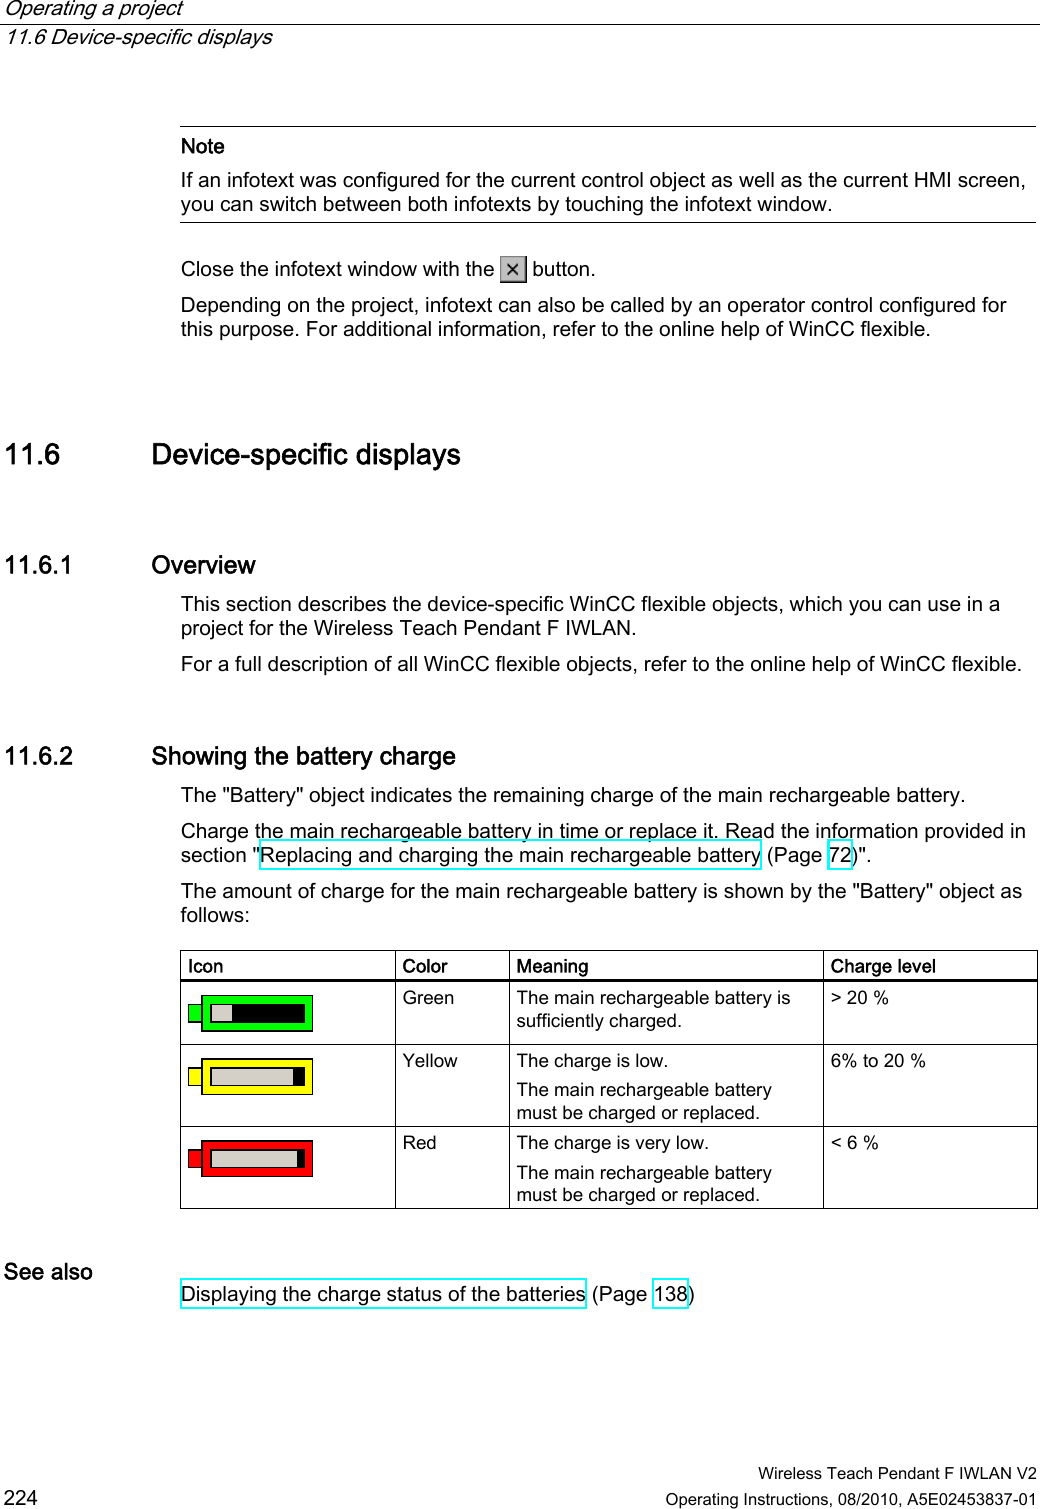 Operating a project   11.6 Device-specific displays  Wireless Teach Pendant F IWLAN V2 224 Operating Instructions, 08/2010, A5E02453837-01   Note If an infotext was configured for the current control object as well as the current HMI screen, you can switch between both infotexts by touching the infotext window.  Close the infotext window with the   button. Depending on the project, infotext can also be called by an operator control configured for this purpose. For additional information, refer to the online help of WinCC flexible. 11.6 Device-specific displays 11.6.1 Overview This section describes the device-specific WinCC flexible objects, which you can use in a project for the Wireless Teach Pendant F IWLAN. For a full description of all WinCC flexible objects, refer to the online help of WinCC flexible.  11.6.2 Showing the battery charge The &quot;Battery&quot; object indicates the remaining charge of the main rechargeable battery.  Charge the main rechargeable battery in time or replace it. Read the information provided in section &quot;Replacing and charging the main rechargeable battery (Page 72)&quot;. The amount of charge for the main rechargeable battery is shown by the &quot;Battery&quot; object as follows:  Icon  Color  Meaning   Charge level  Green  The main rechargeable battery is sufficiently charged. &gt; 20 %  Yellow  The charge is low. The main rechargeable battery must be charged or replaced. 6% to 20 %  Red  The charge is very low. The main rechargeable battery must be charged or replaced. &lt; 6 % See also  Displaying the charge status of the batteries (Page 138) PRELIMINARY II 1.7.2010